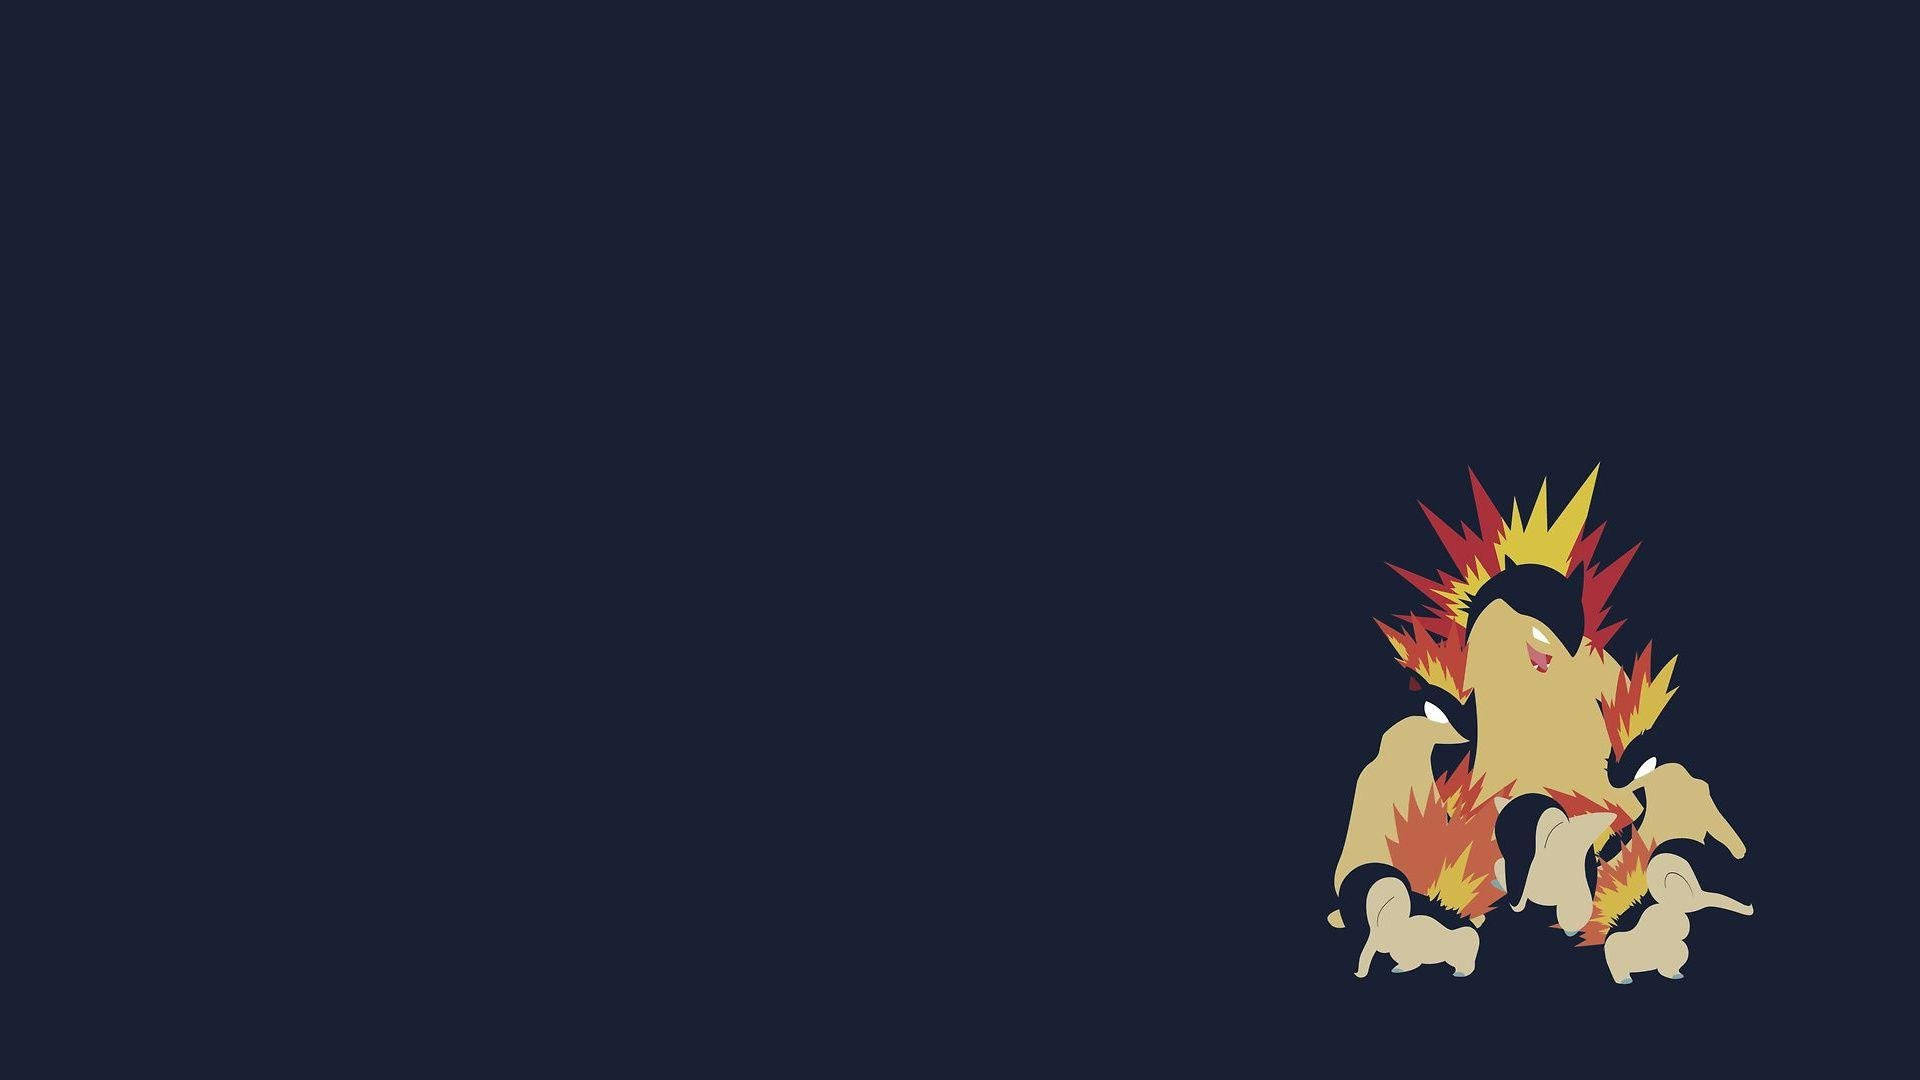 Share more than 134 cyndaquil wallpaper latest